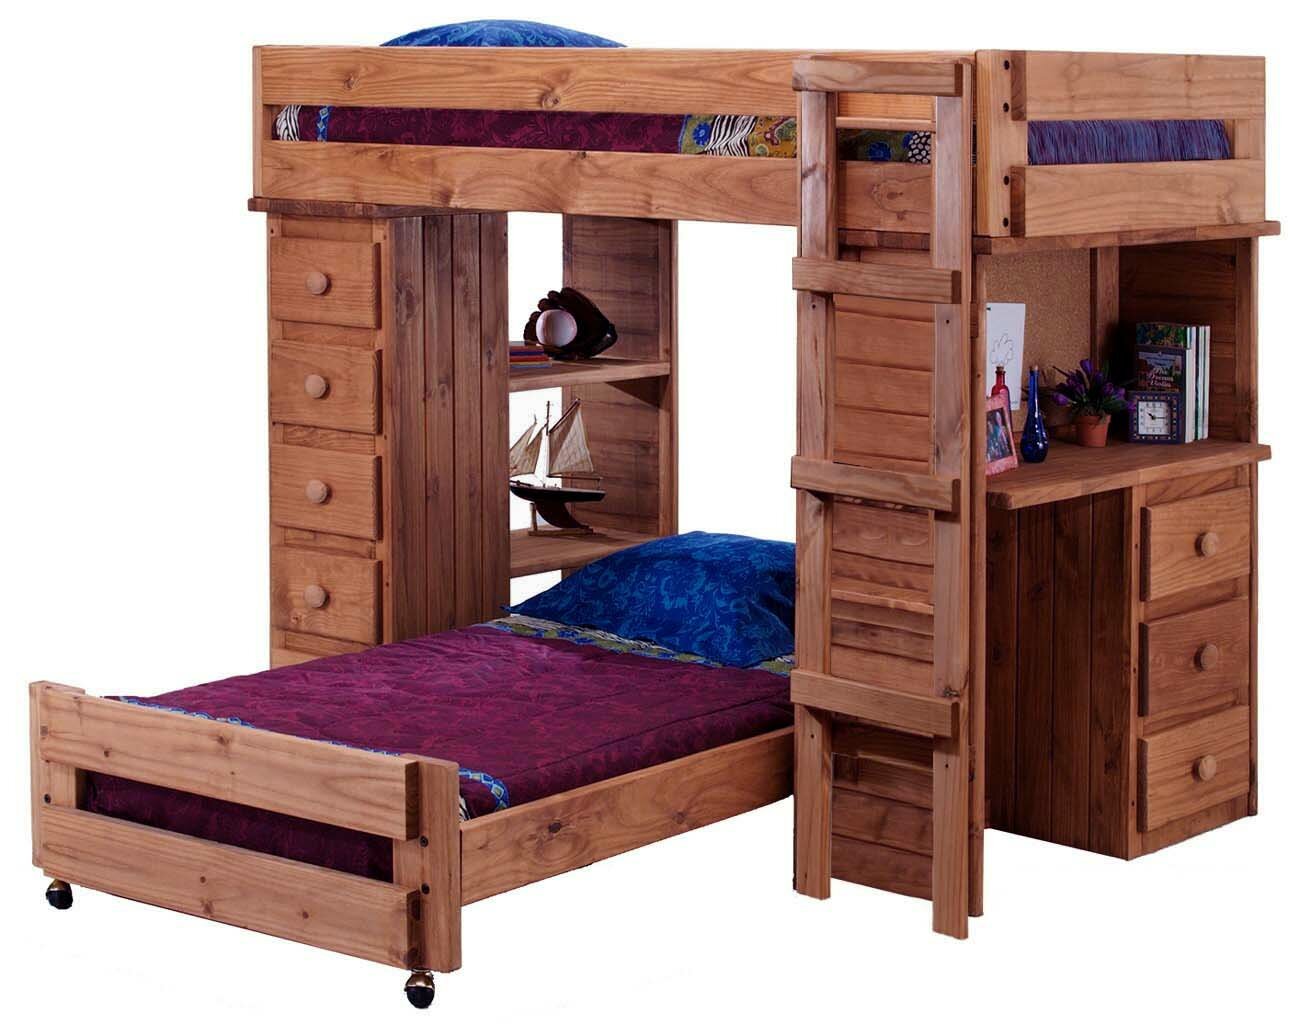 wooden bunk beds with shelves